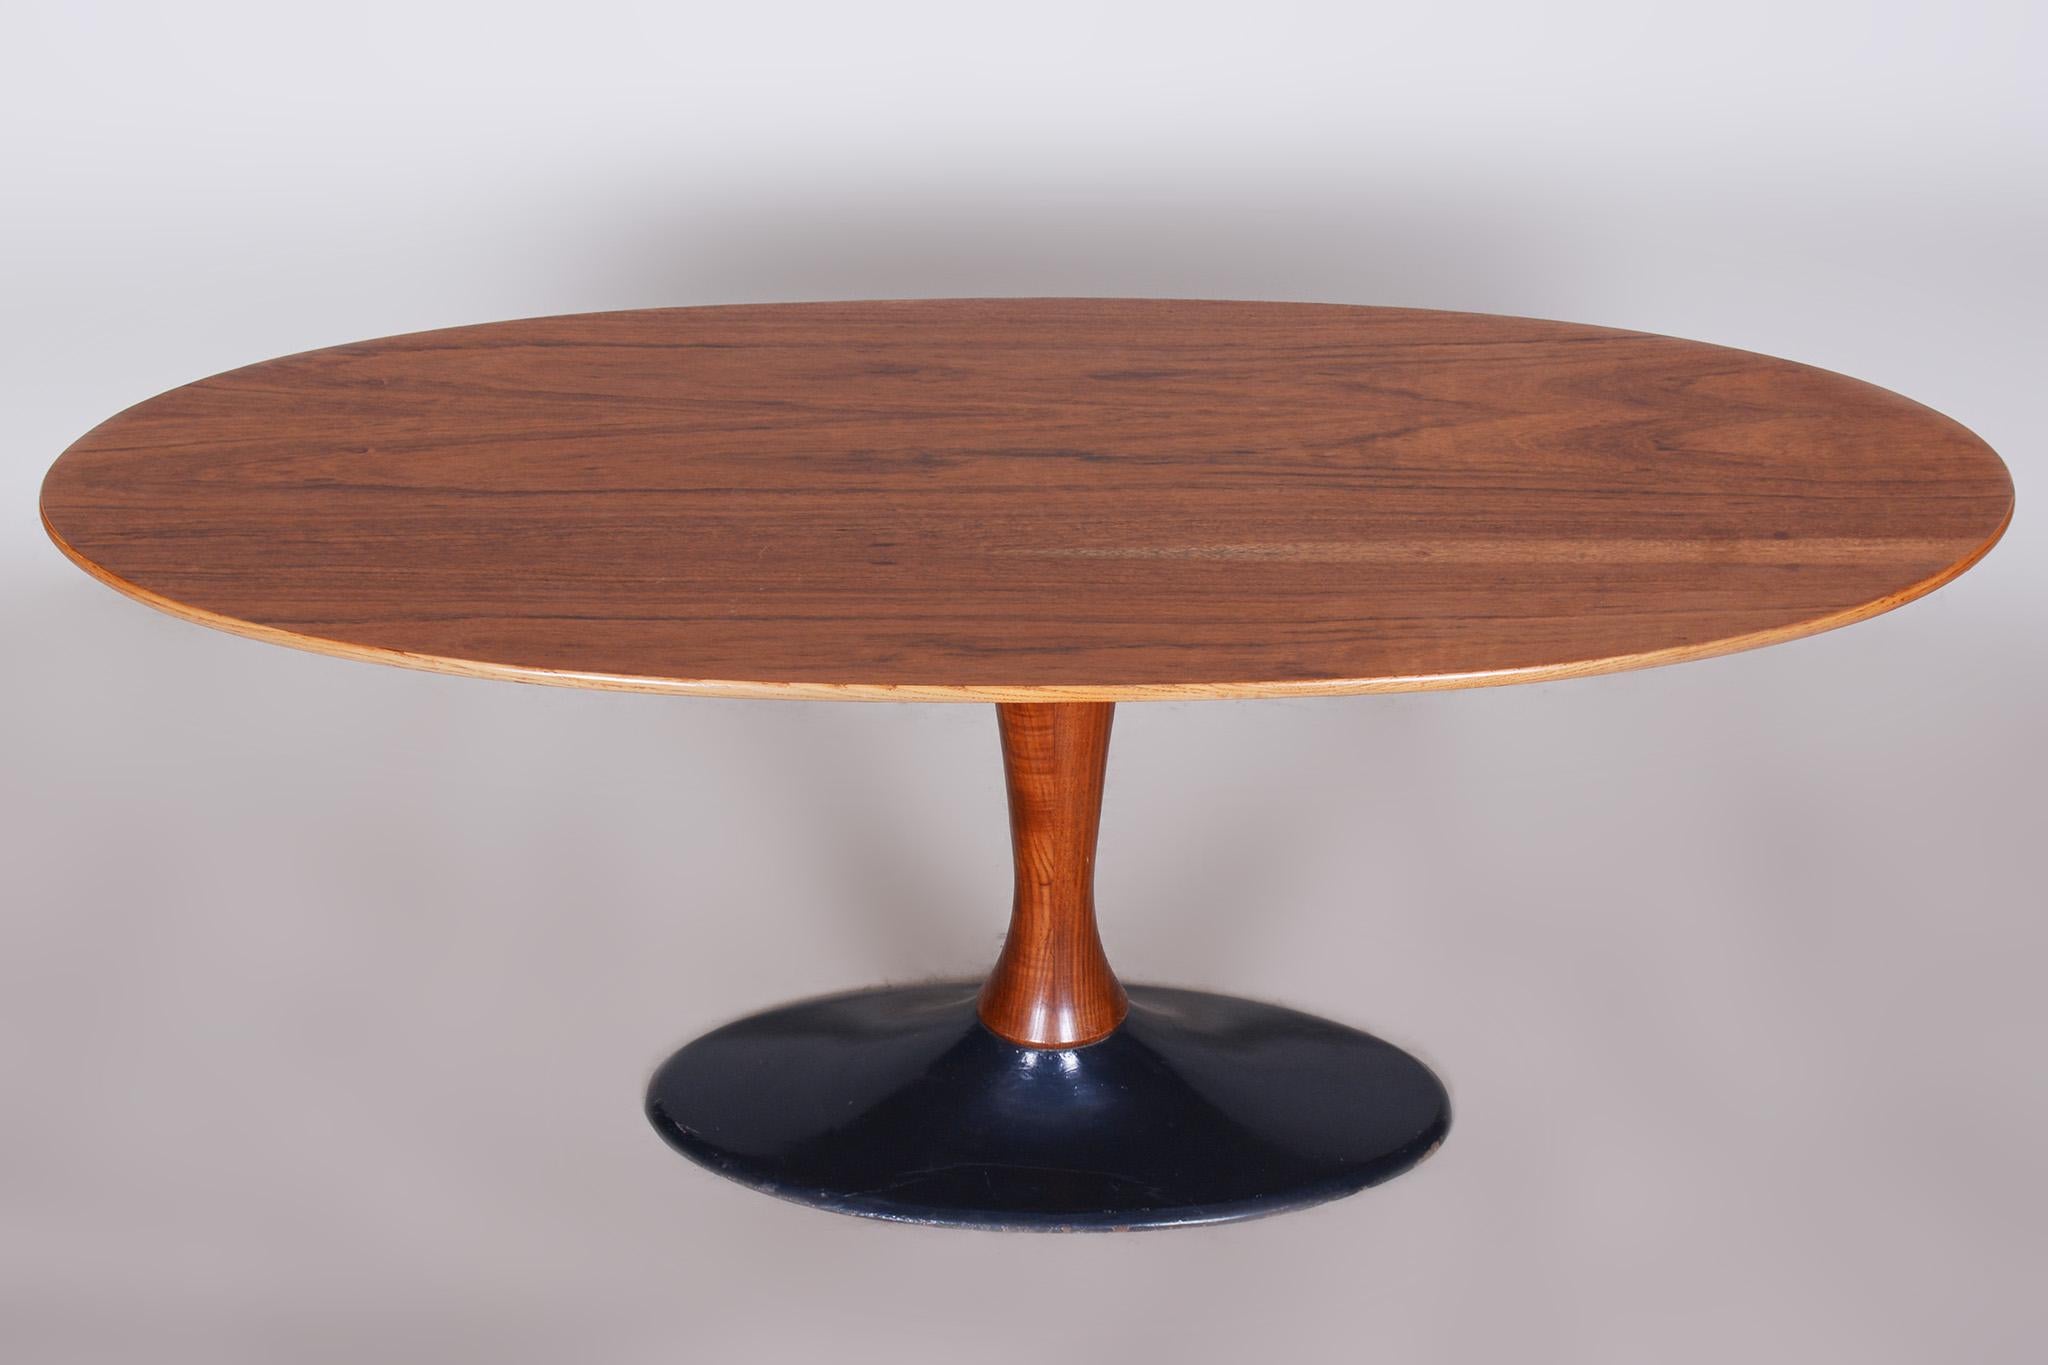 Czech Mid-Century Rosewood Oval Table with Cast Iron Base, 1950s In Good Condition For Sale In Horomerice, CZ